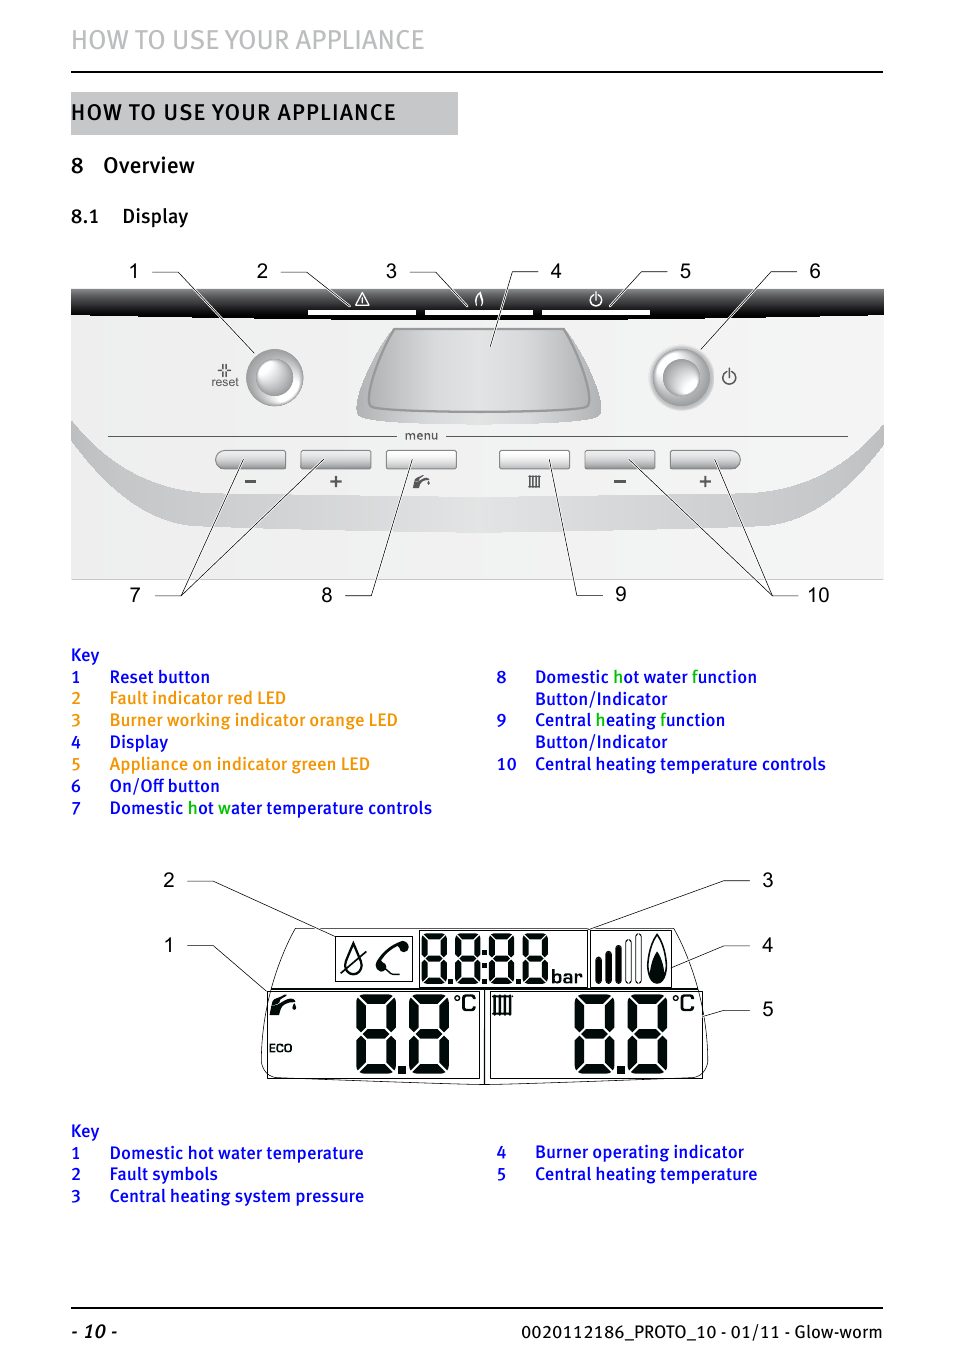 How to use your appliance | Glow-worm Ultracom2 35 Store User Manual | Page 12 / 20